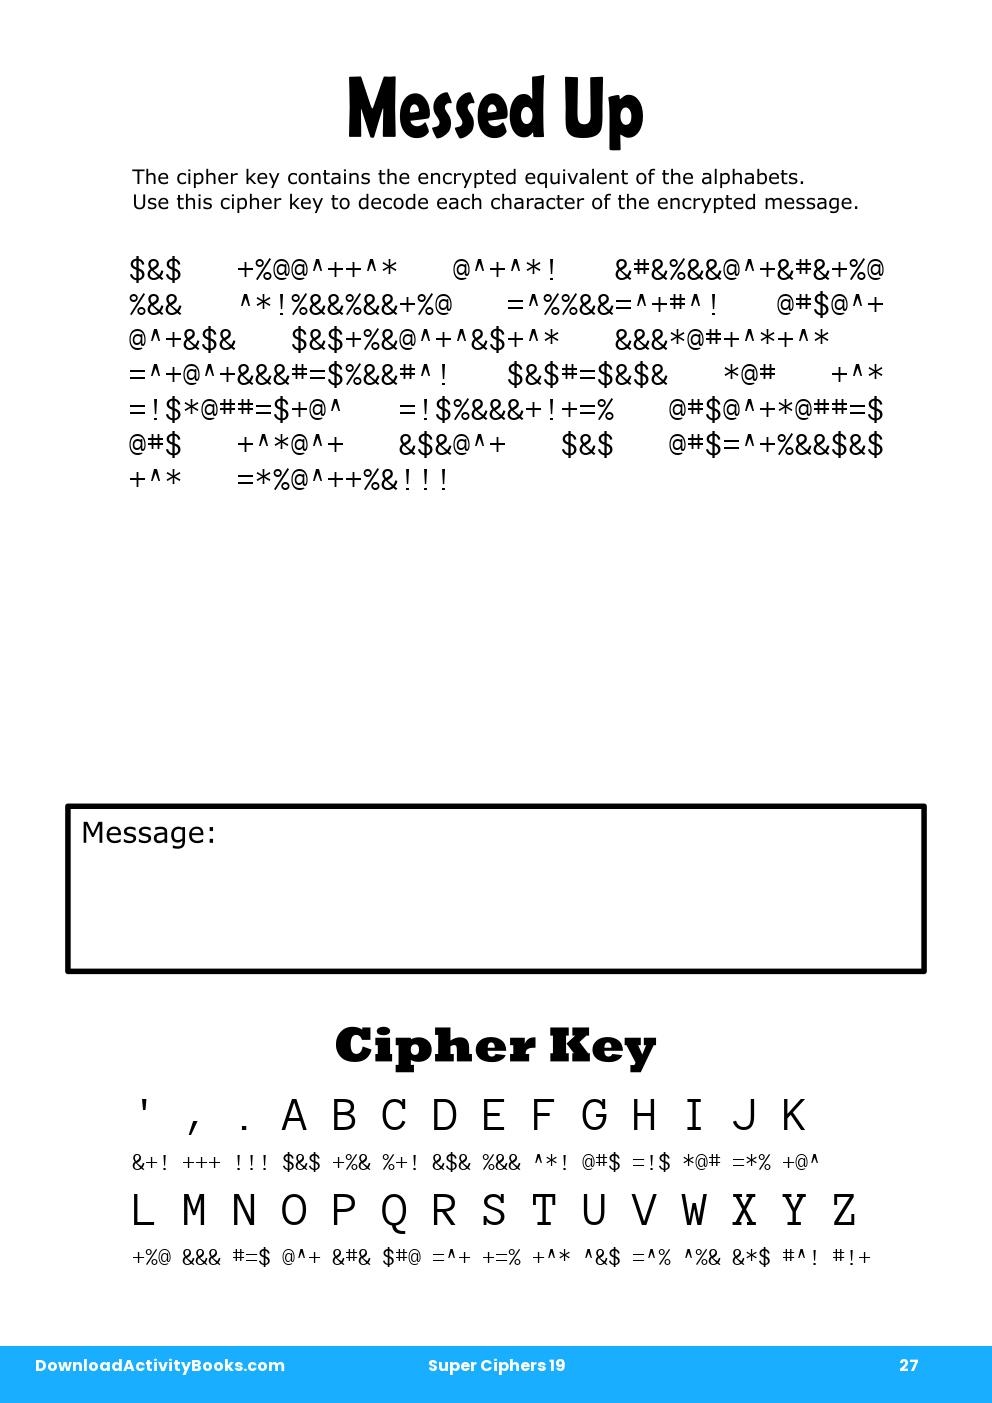 Messed Up in Super Ciphers 19